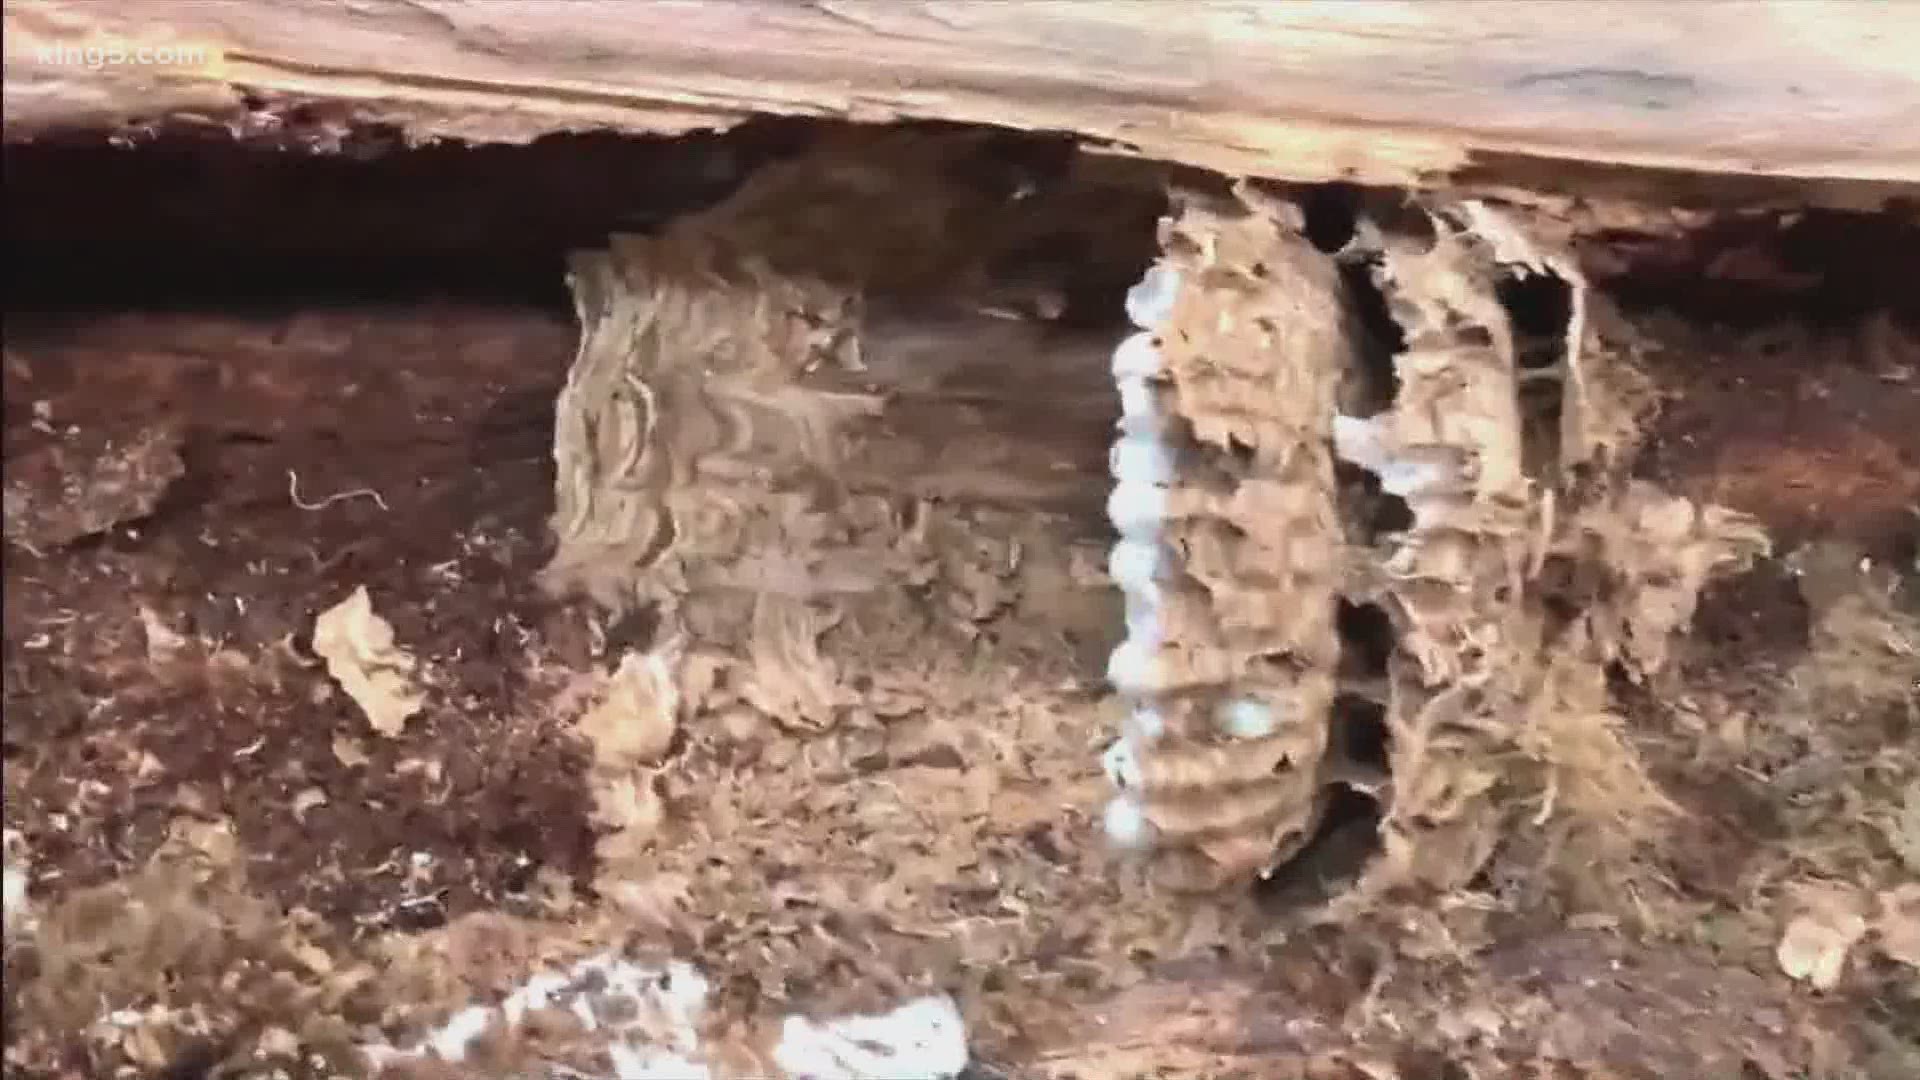 Jaime Polinder was surprised when he was told that the first Asian giant hornet nest found in the U.S. was on his property.